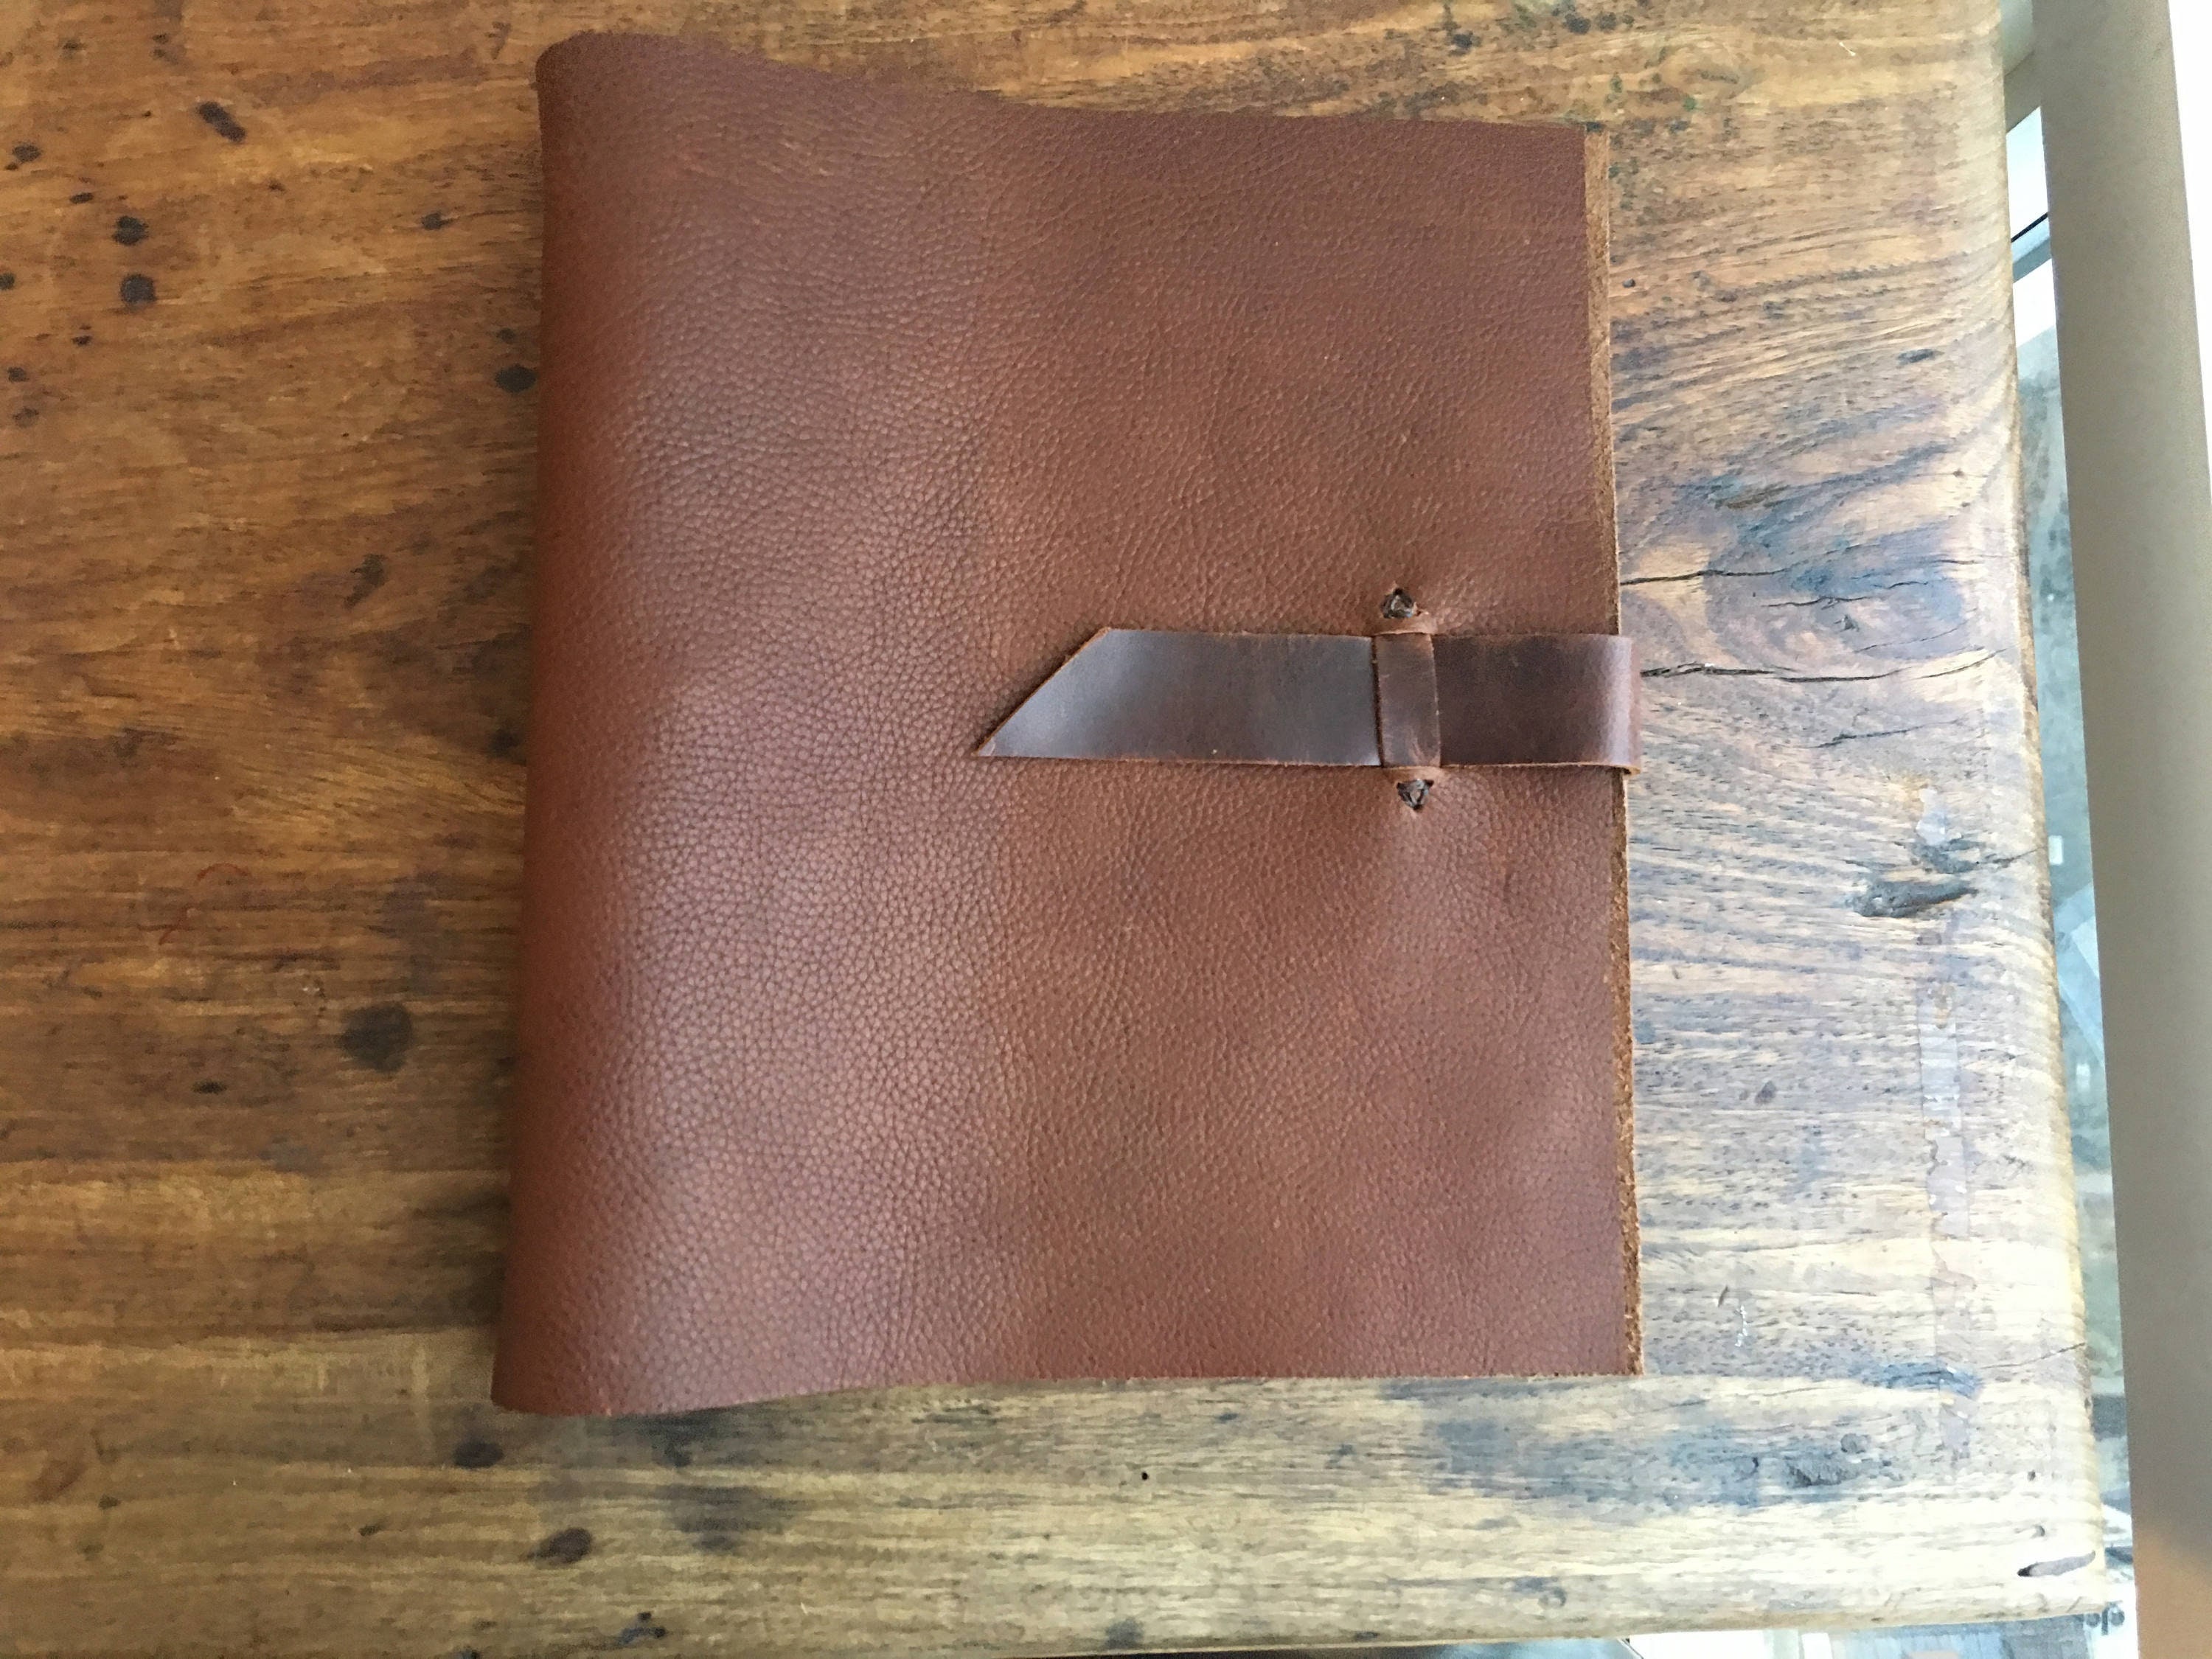 Leather refillable sketchbook, Large brown leather 8.5 x 11 custom notebook  cover, Creative sketchbook ideas handmade leather sketch journal